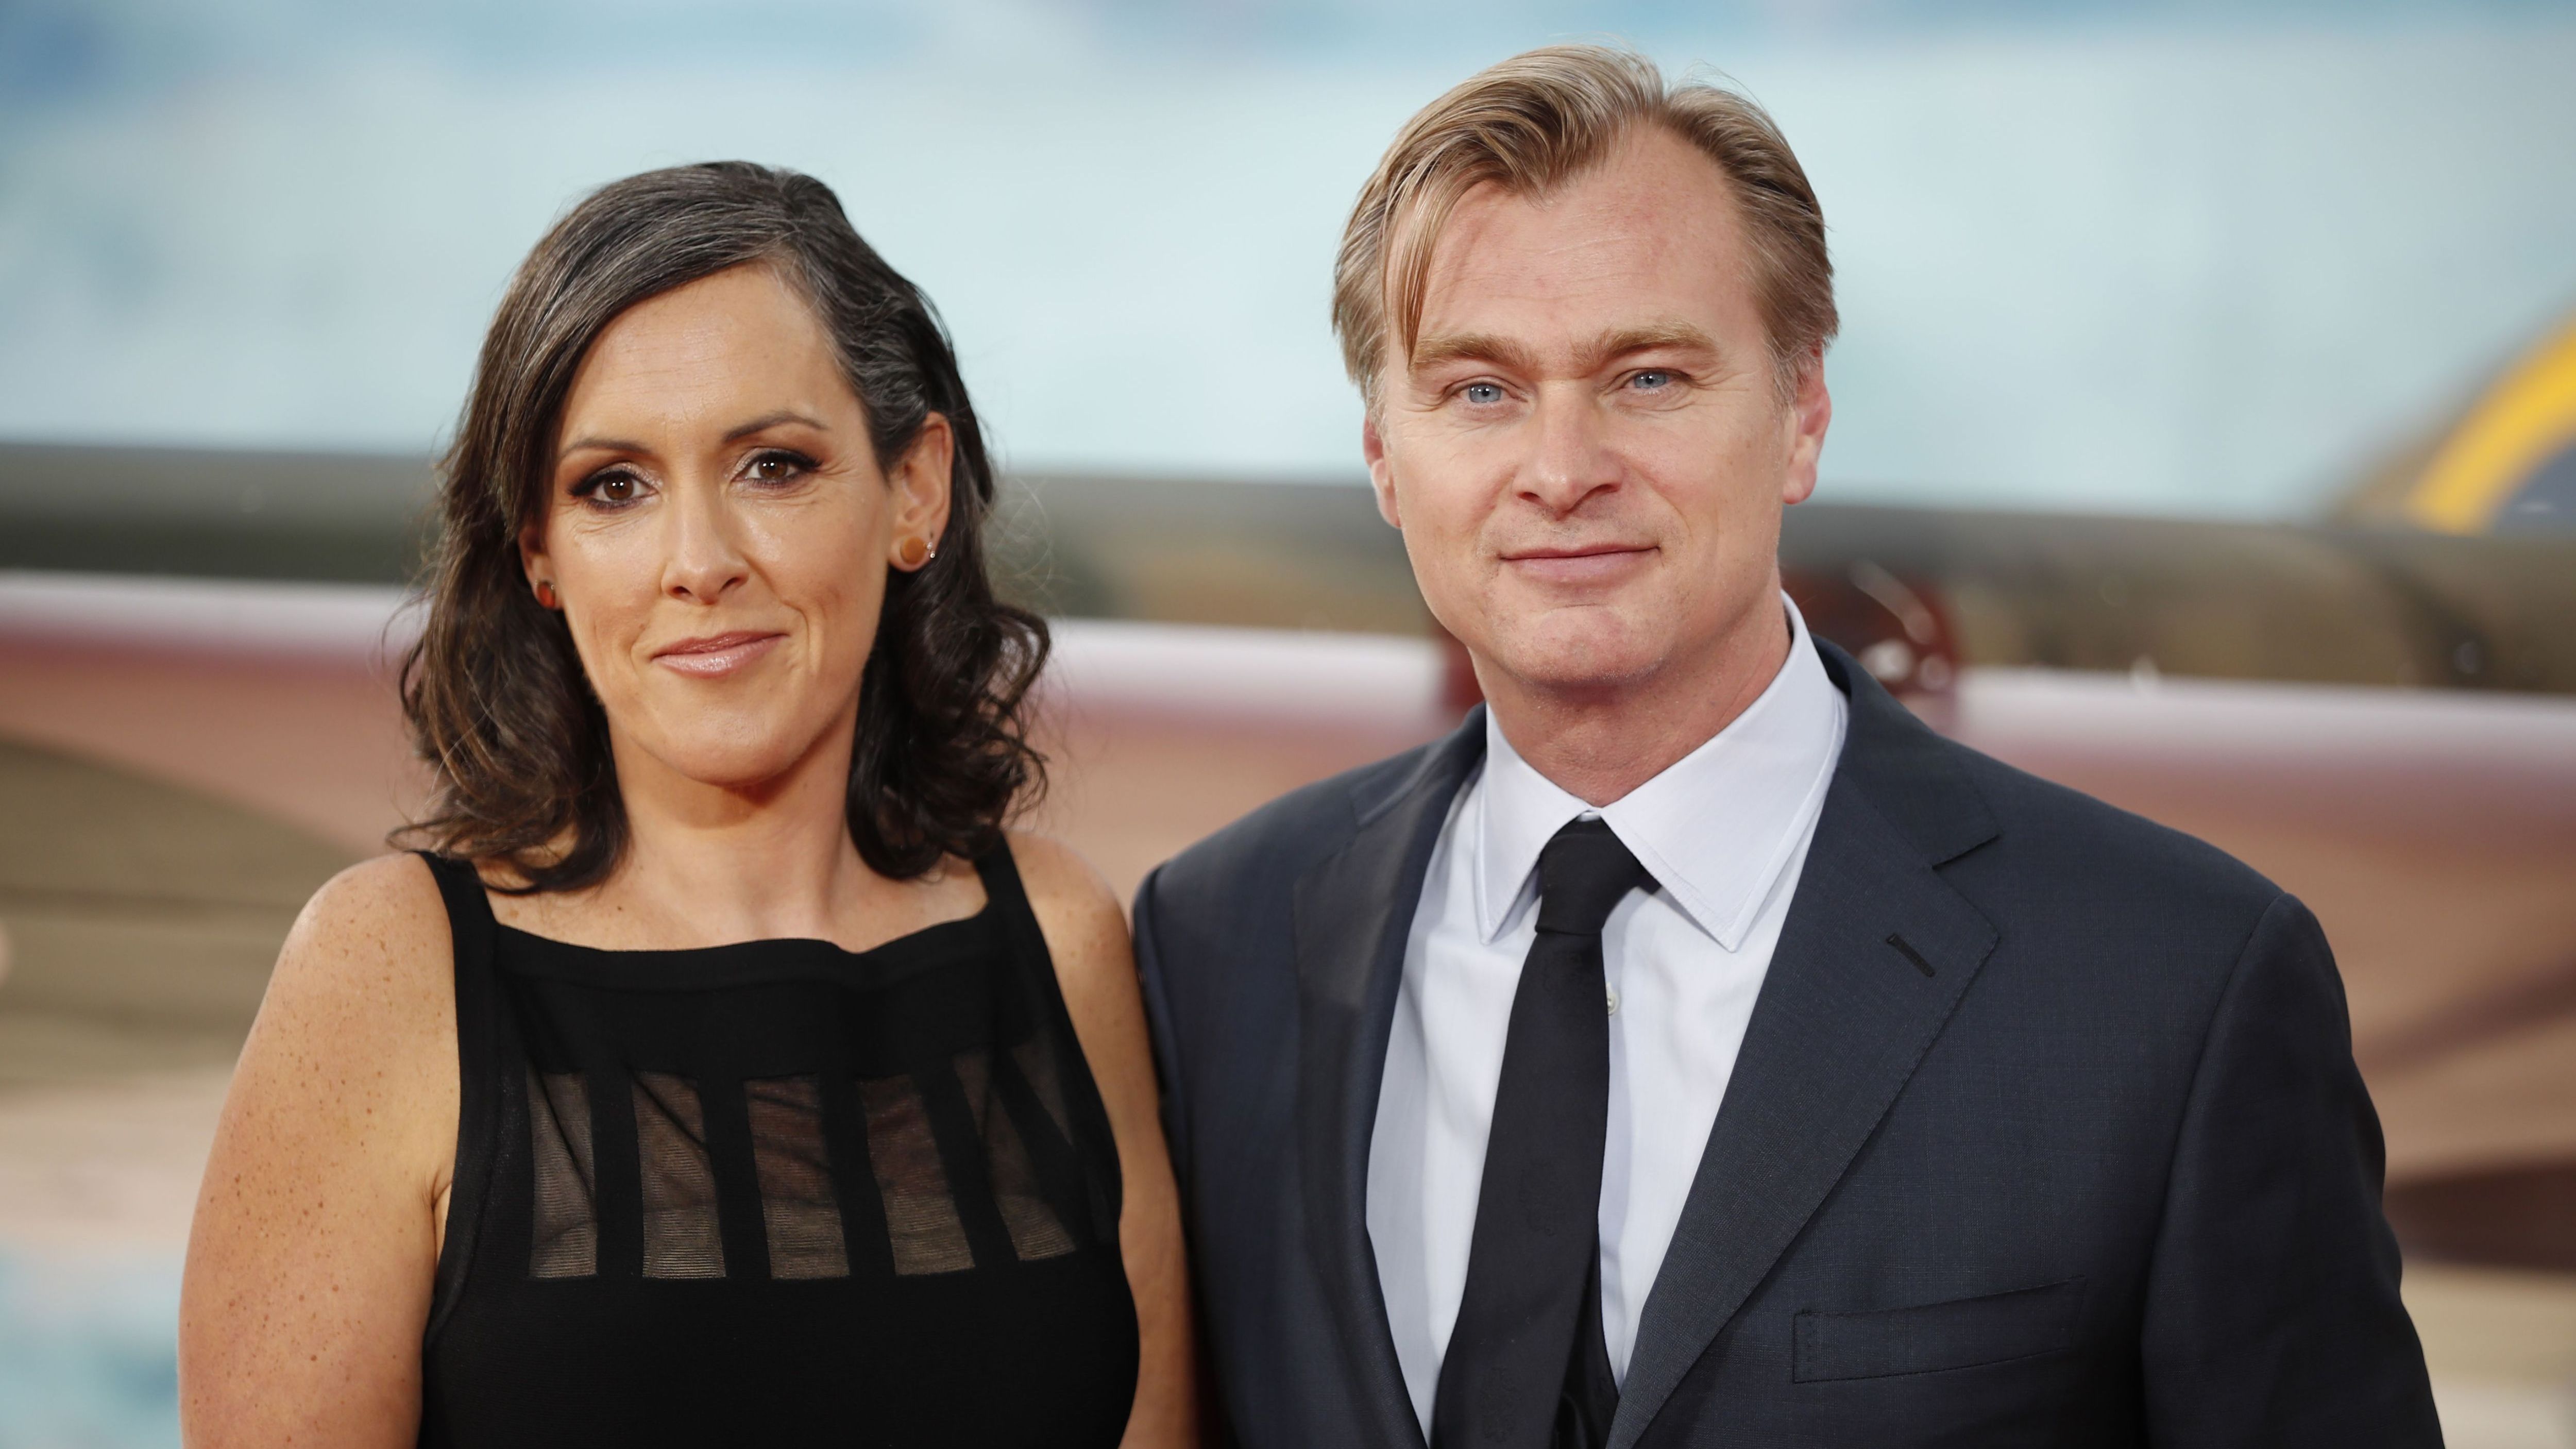 The director Christopher Nolan and his wife Emma Thomas, a producer, have been given honours for their services to film